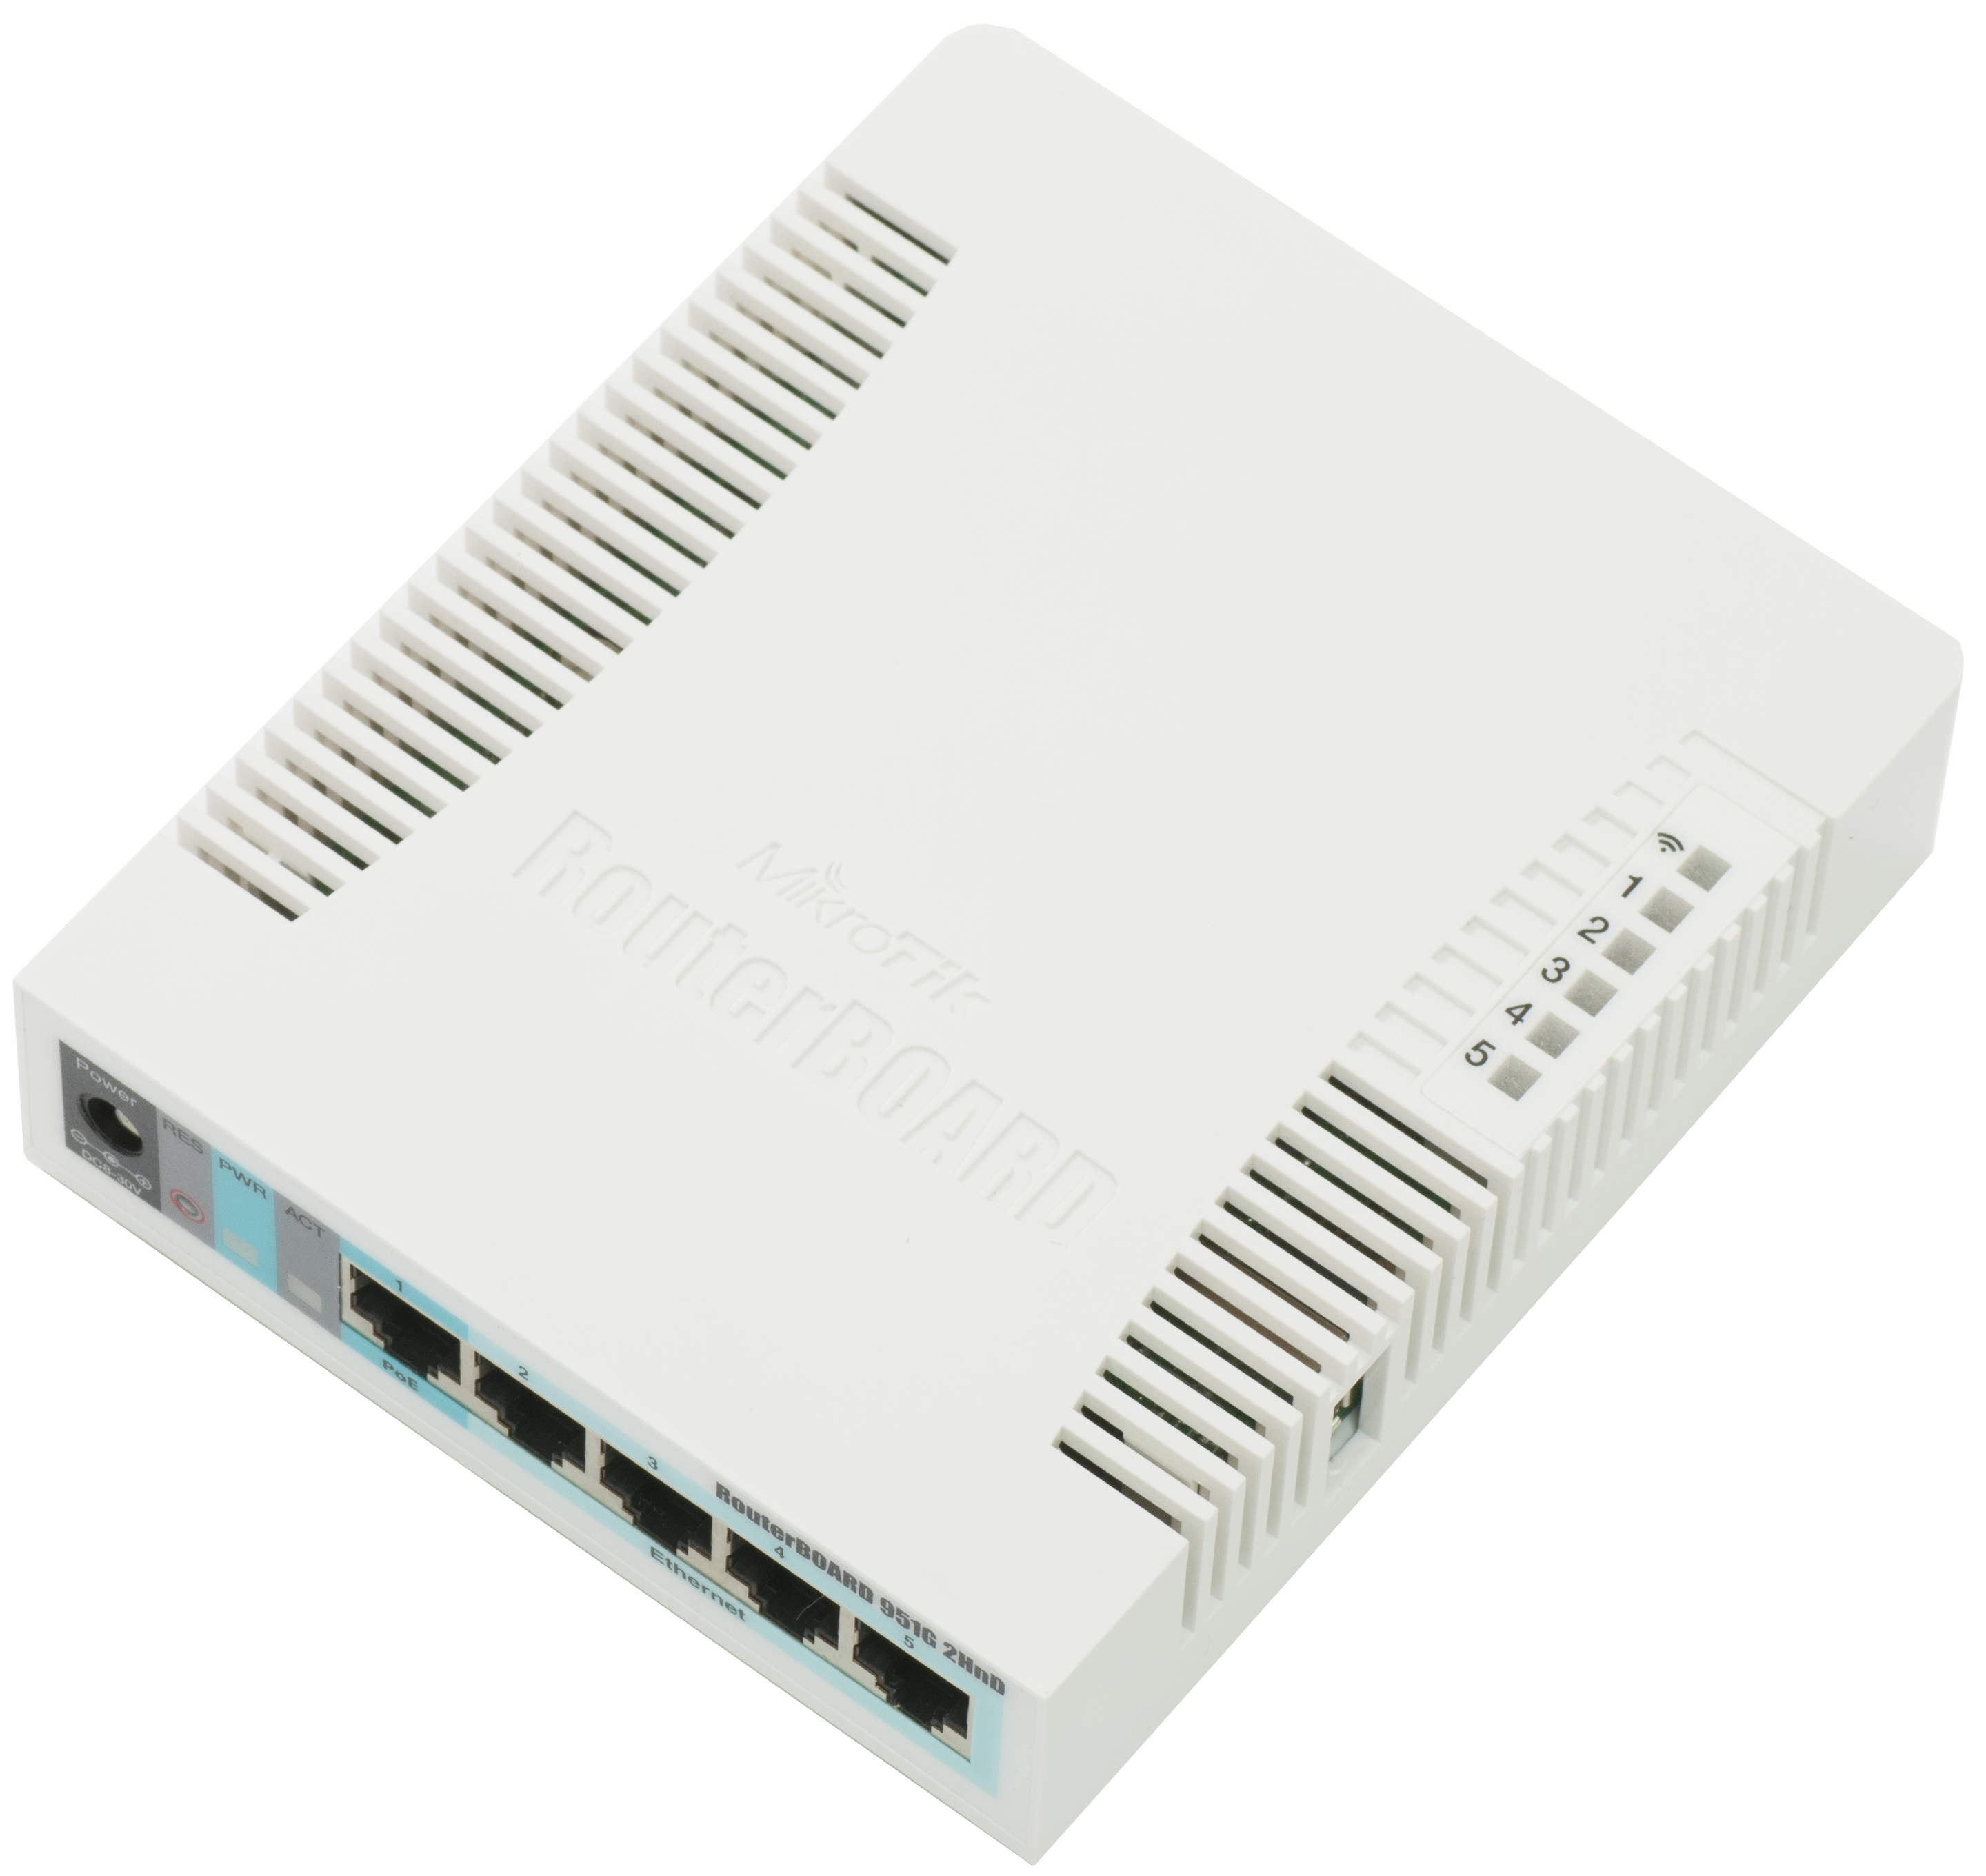 MikroTik MikroTik RouterBOARD RB951G-2HnD Radio access point GigE Wi-Fi 2.4 G RB951G-2HND 